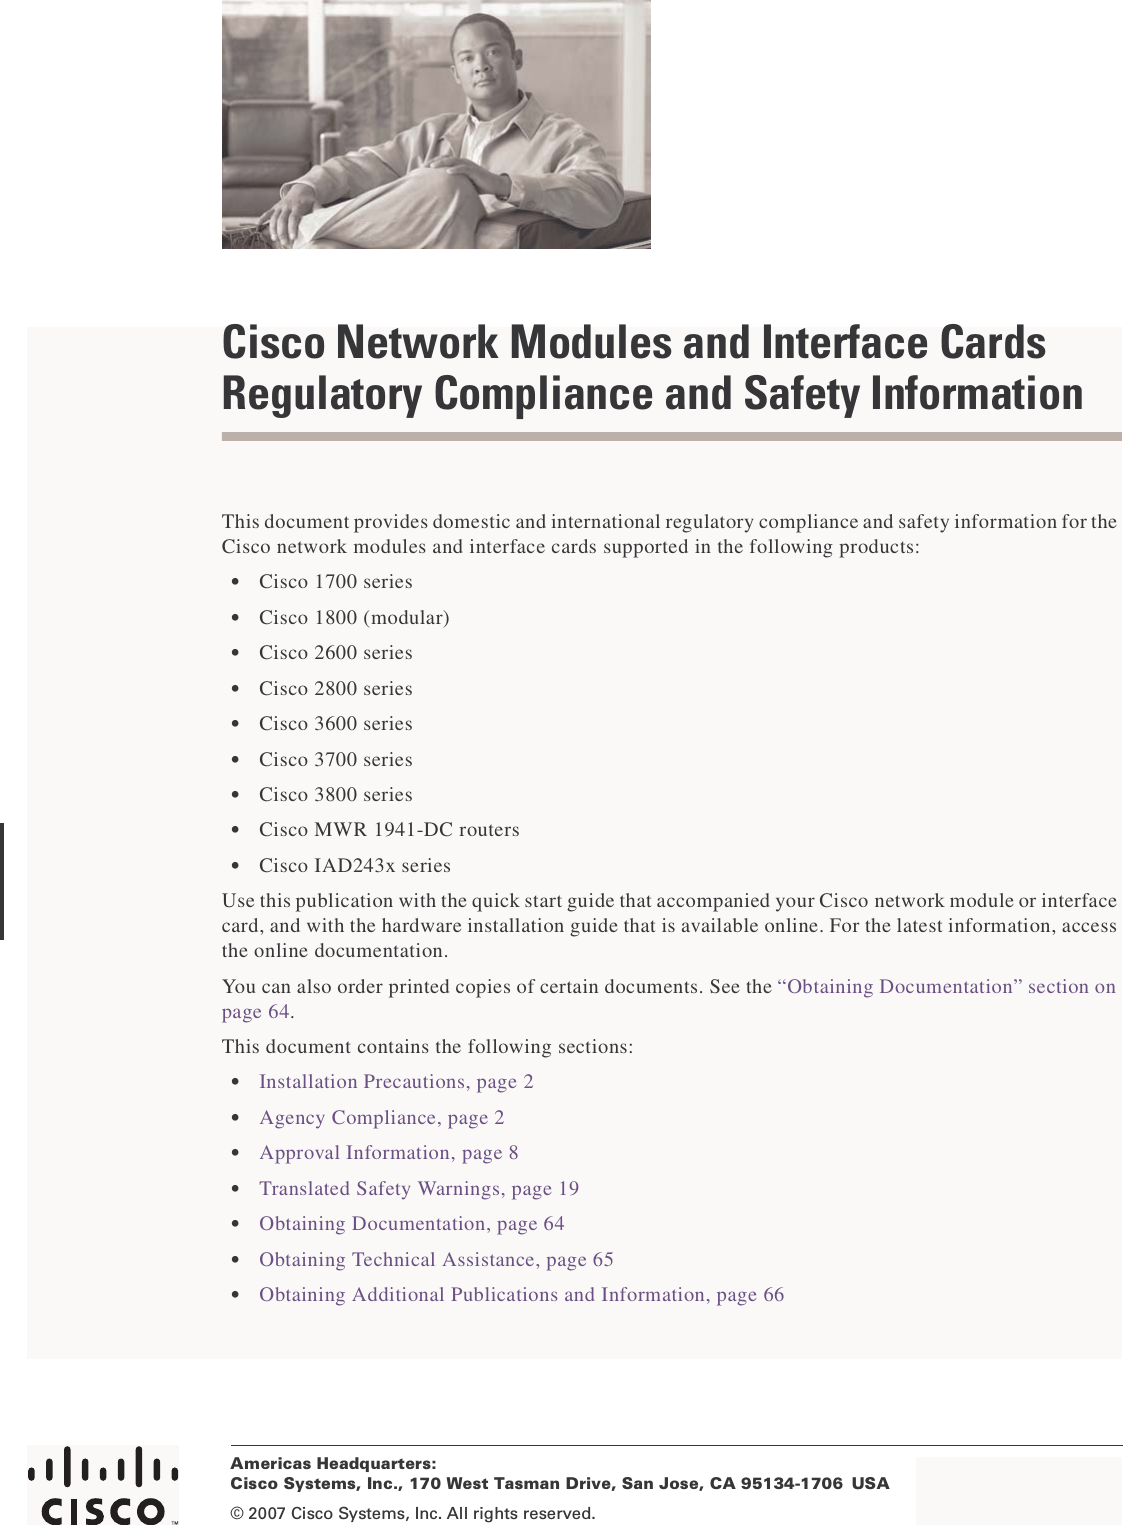 Americas Headquarters:© 2007 Cisco Systems, Inc. All rights reserved.Cisco Systems, Inc., 170 West Tasman Drive, San Jose, CA 95134-1706 USACisco Network Modules and Interface Cards Regulatory Compliance and Safety InformationThis document provides domestic and international regulatory compliance and safety information for the Cisco network modules and interface cards supported in the following products:•Cisco1700series•Cisco 1800 (modular)•Cisco2600series•Cisco2800series•Cisco3600series•Cisco 3700 series•Cisco3800series•Cisco MWR 1941-DC routers•Cisco IAD243x seriesUse this publication with the quick start guide that accompanied your Cisco network module or interface card, and with the hardware installation guide that is available online. For the latest information, access the online documentation.You can also order printed copies of certain documents. See the “Obtaining Documentation” section on page 64.This document contains the following sections:•Installation Precautions, page 2•Agency Compliance, page 2•Approval Information, page 8•Translated Safety Warnings, page 19•Obtaining Documentation, page 64•Obtaining Technical Assistance, page 65•Obtaining Additional Publications and Information, page 66